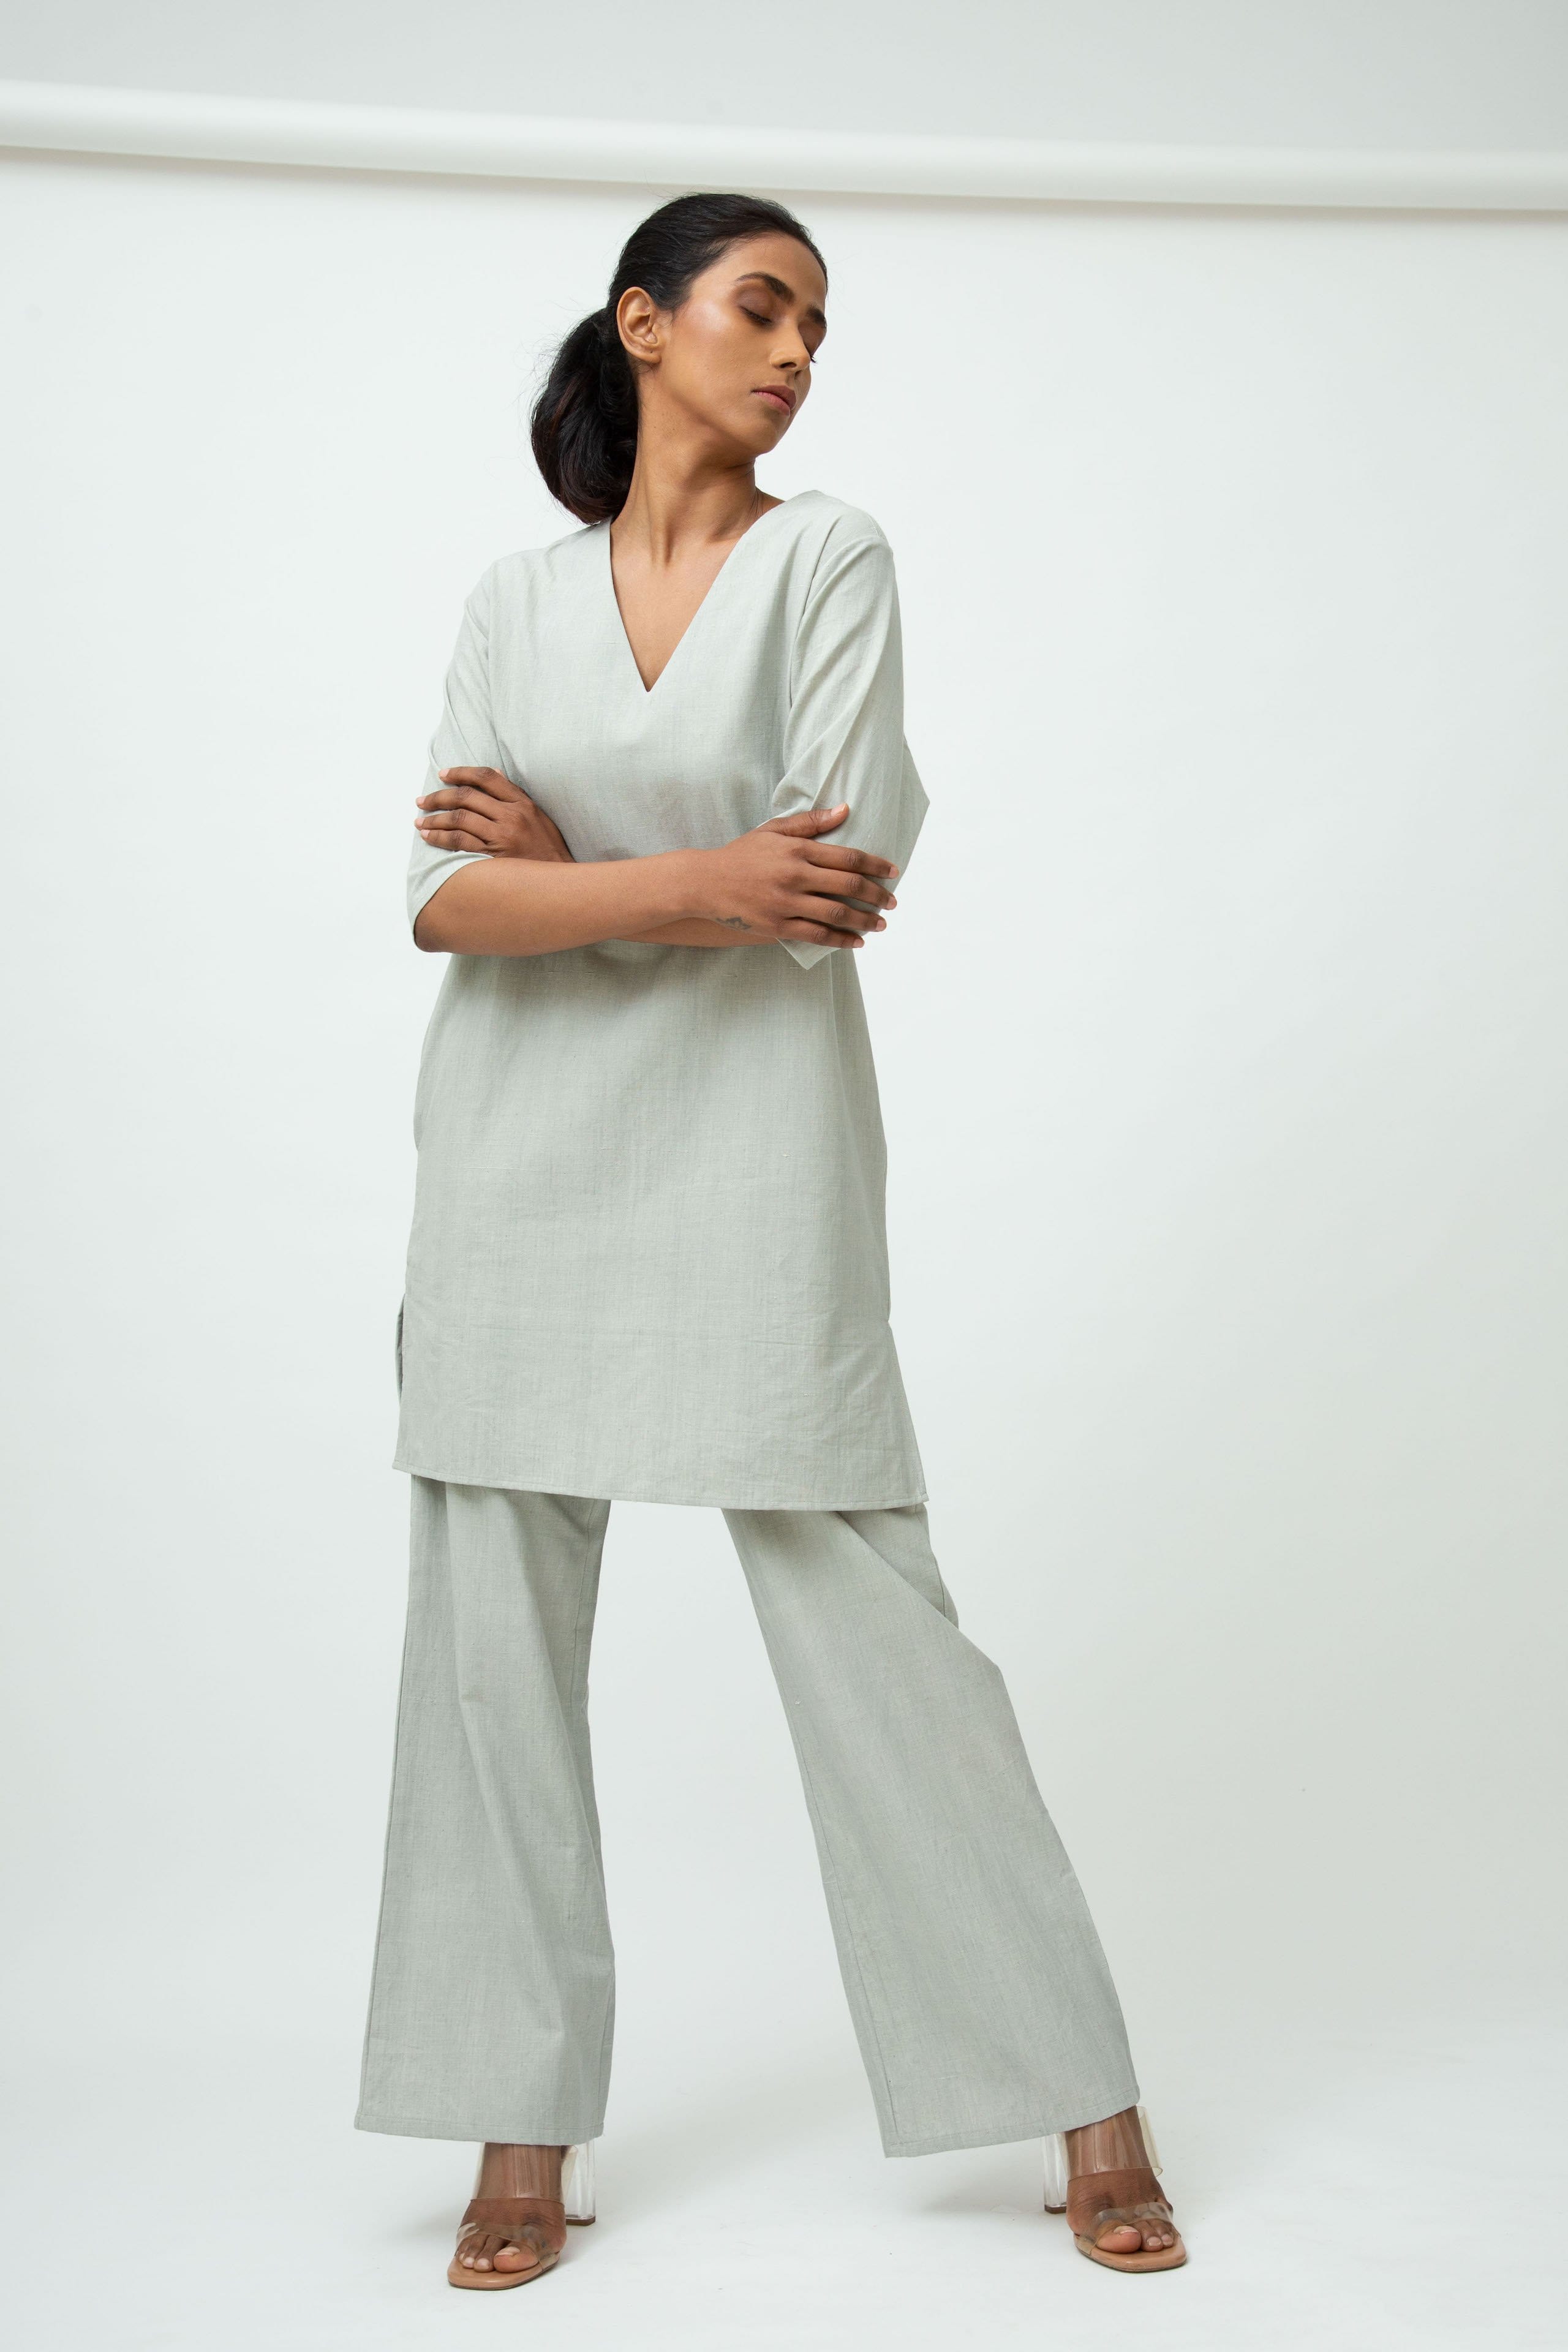 Saltpetre womens casual and lounge wear - cloud grey. Three-quarter sleeves with v-shaped neck one-piece.